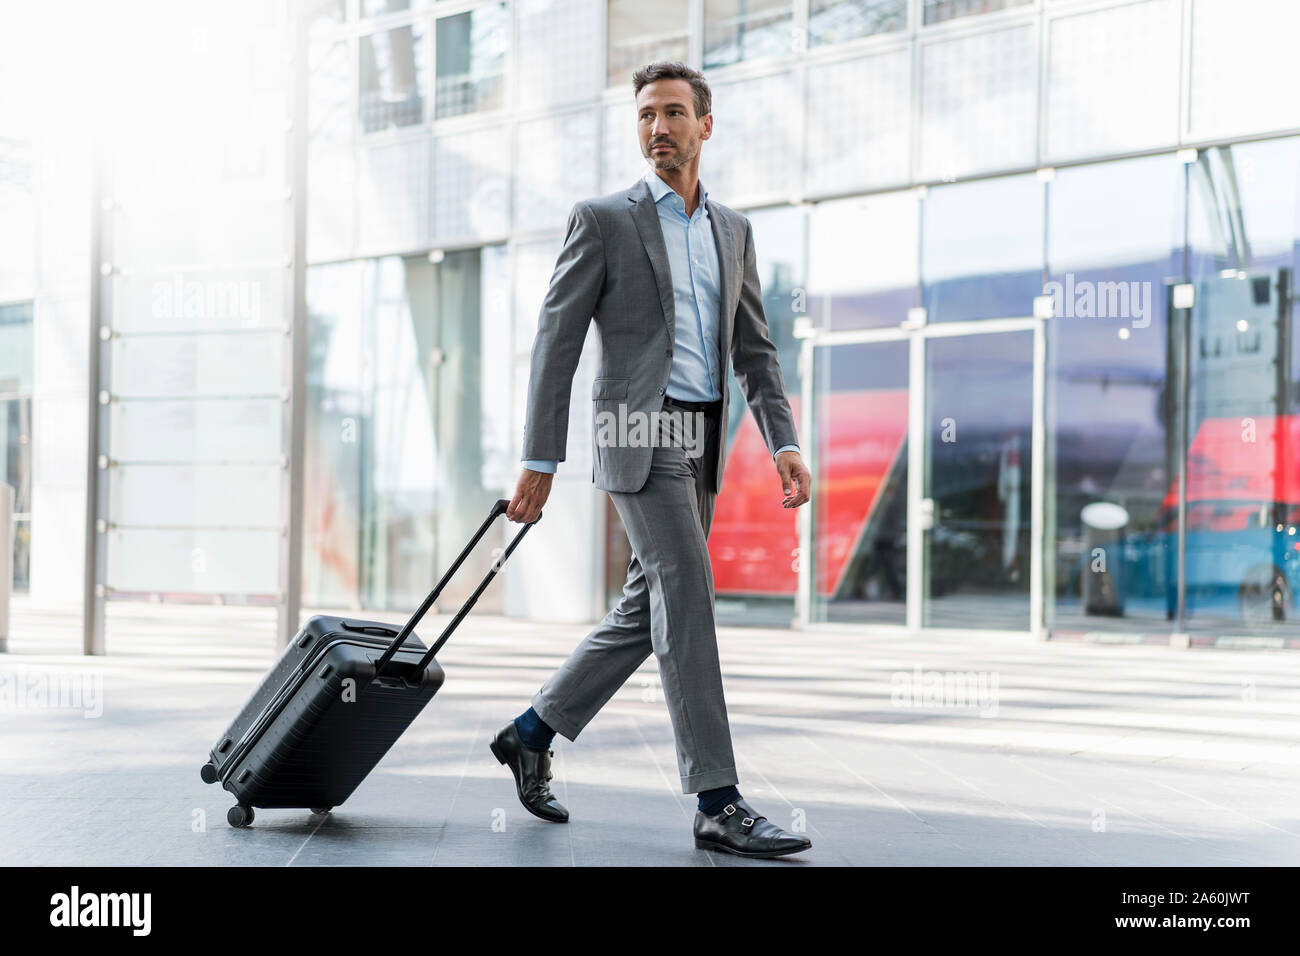 Businessman with baggage on the go Stock Photo